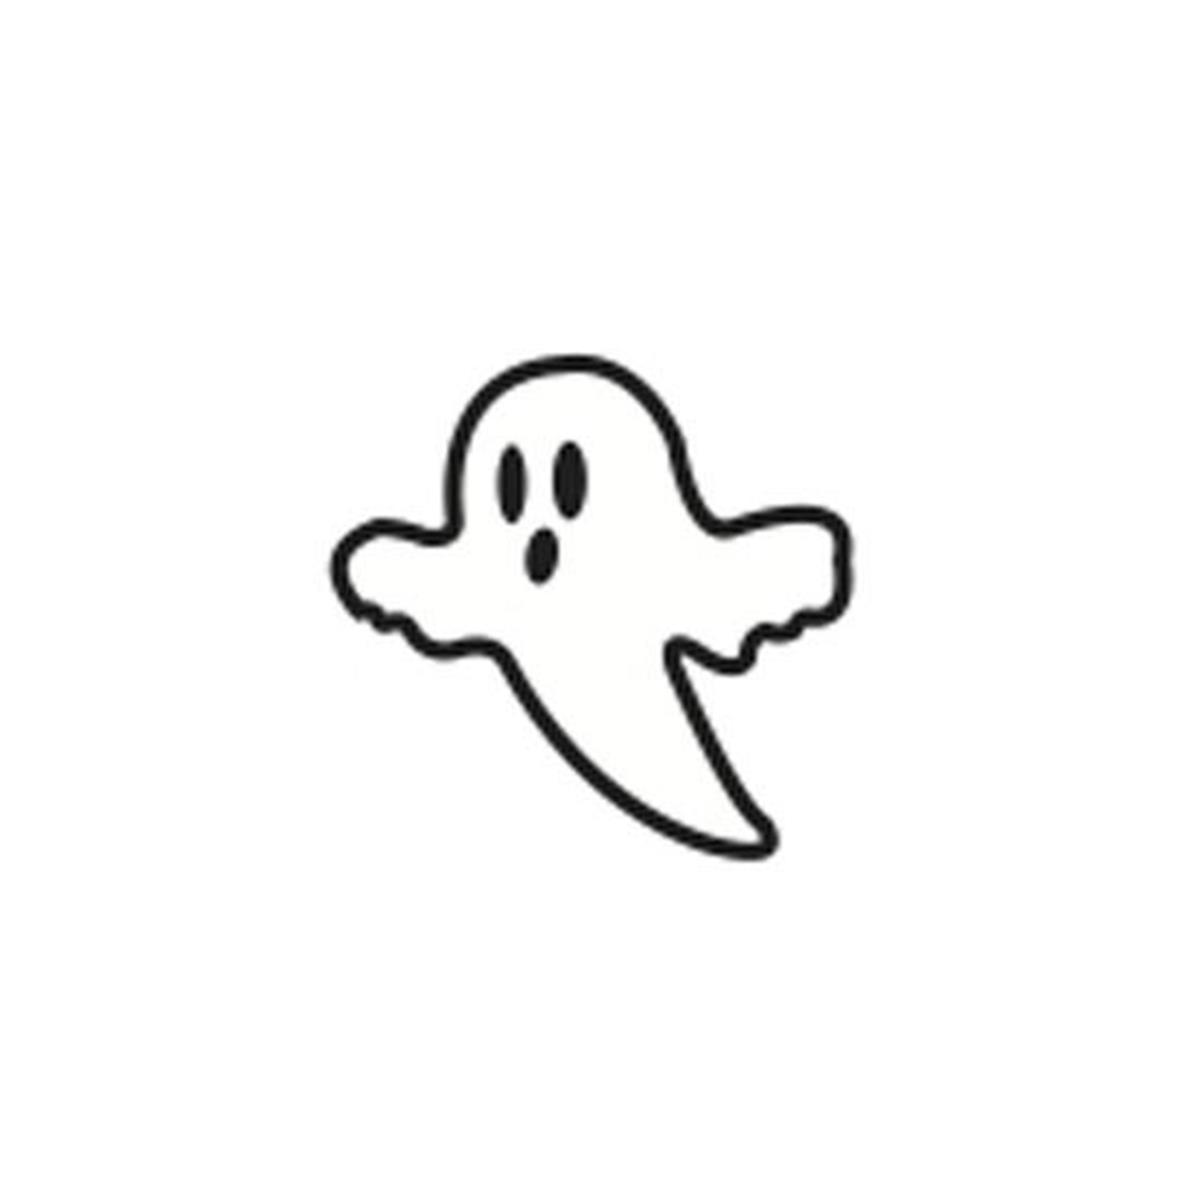 Se-0416 0.5 X 0.5 In. Incentive Stamp - Ghost